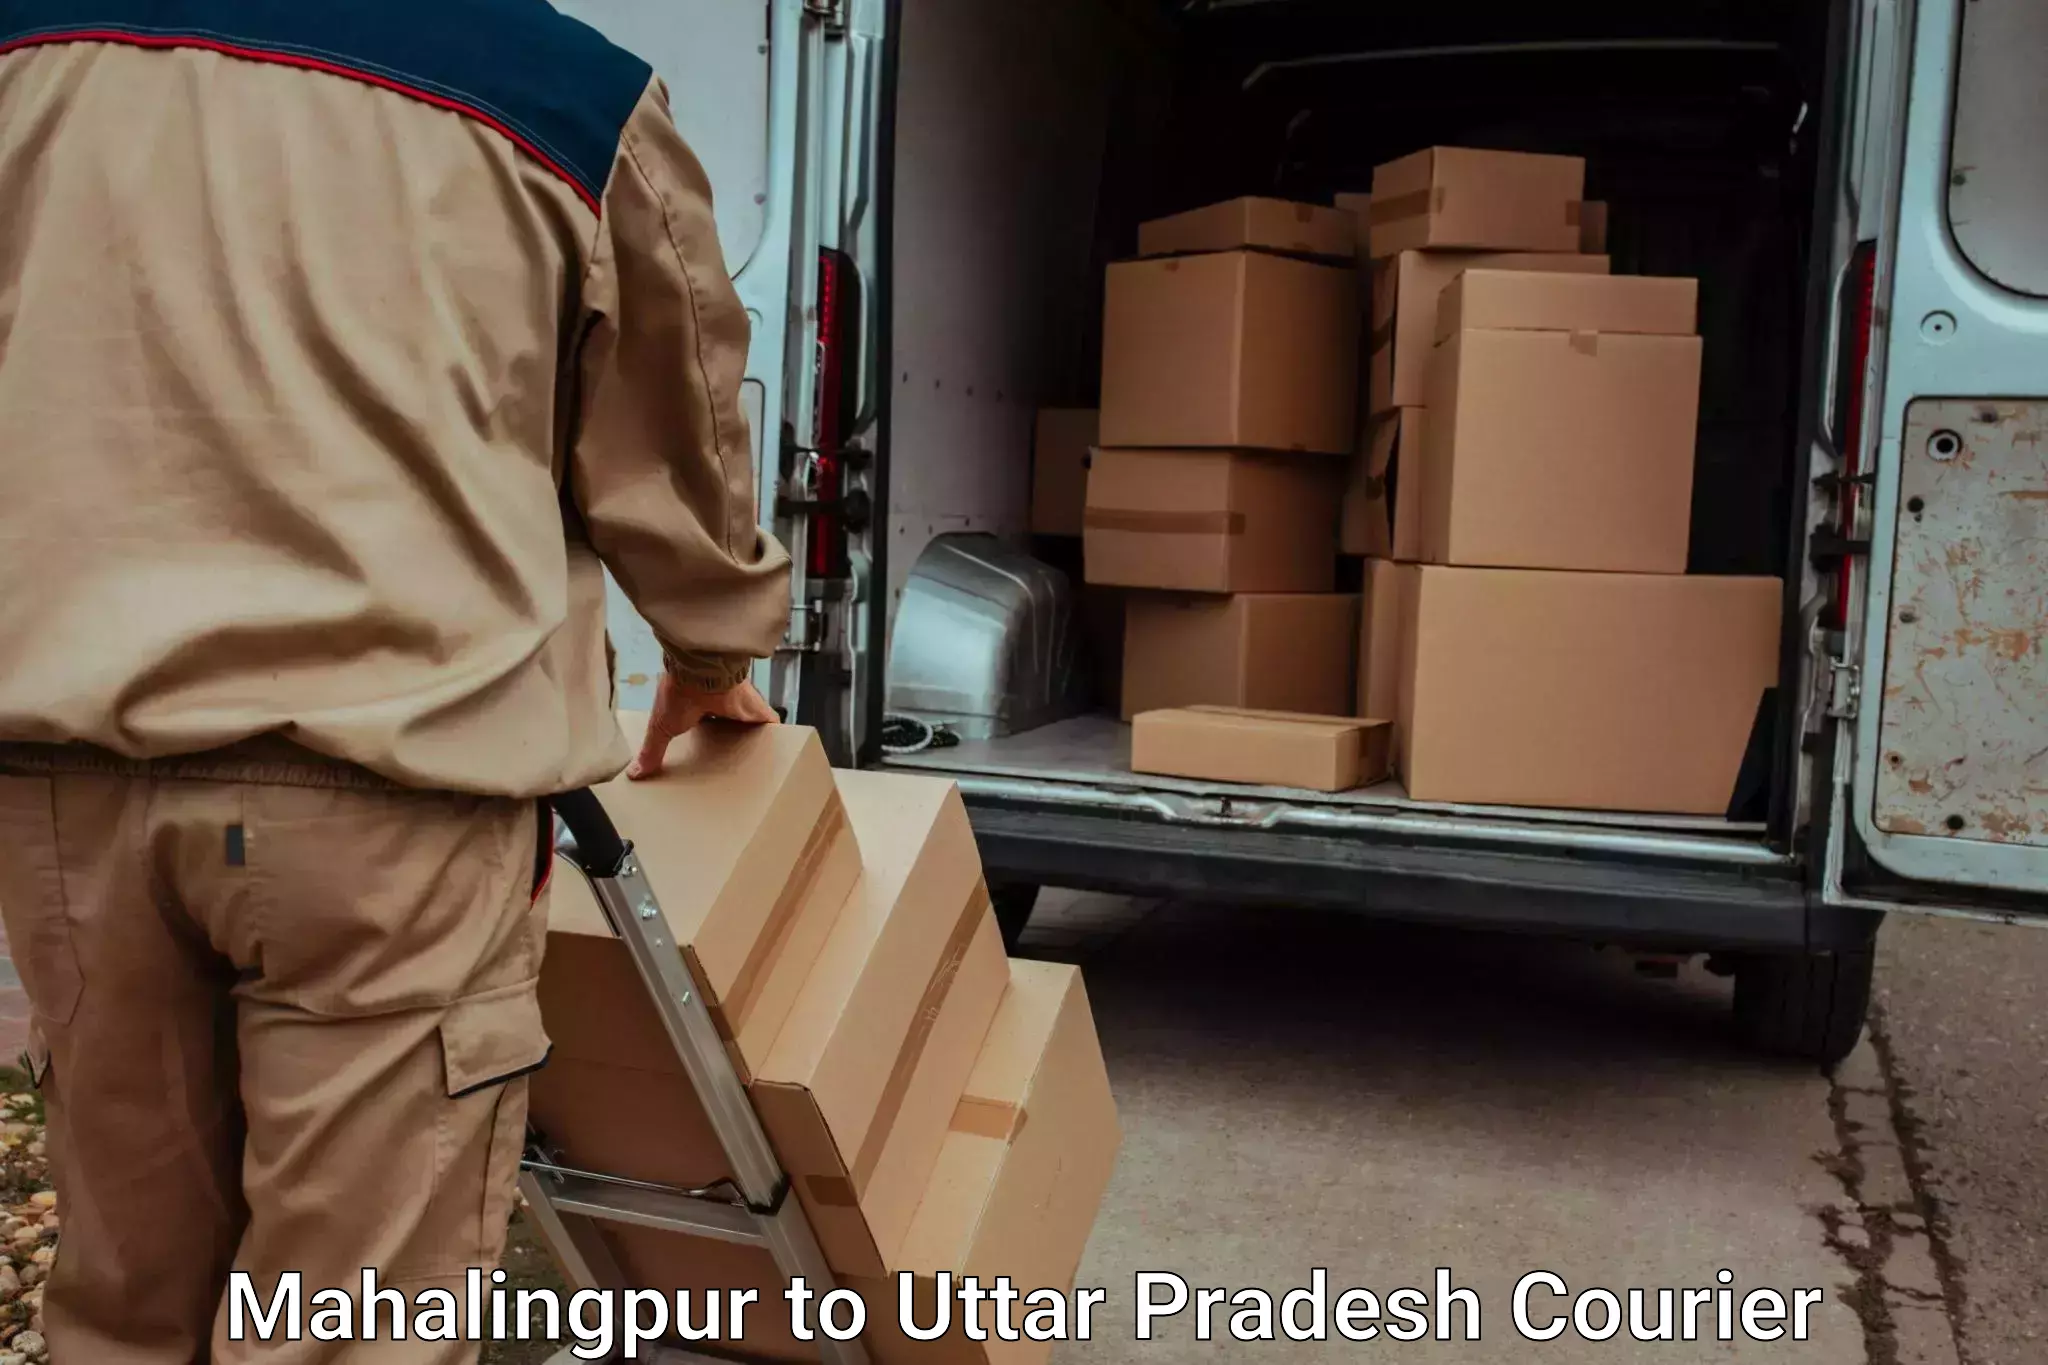 Efficient packing and moving Mahalingpur to Dayalbagh Educational Institute Agra